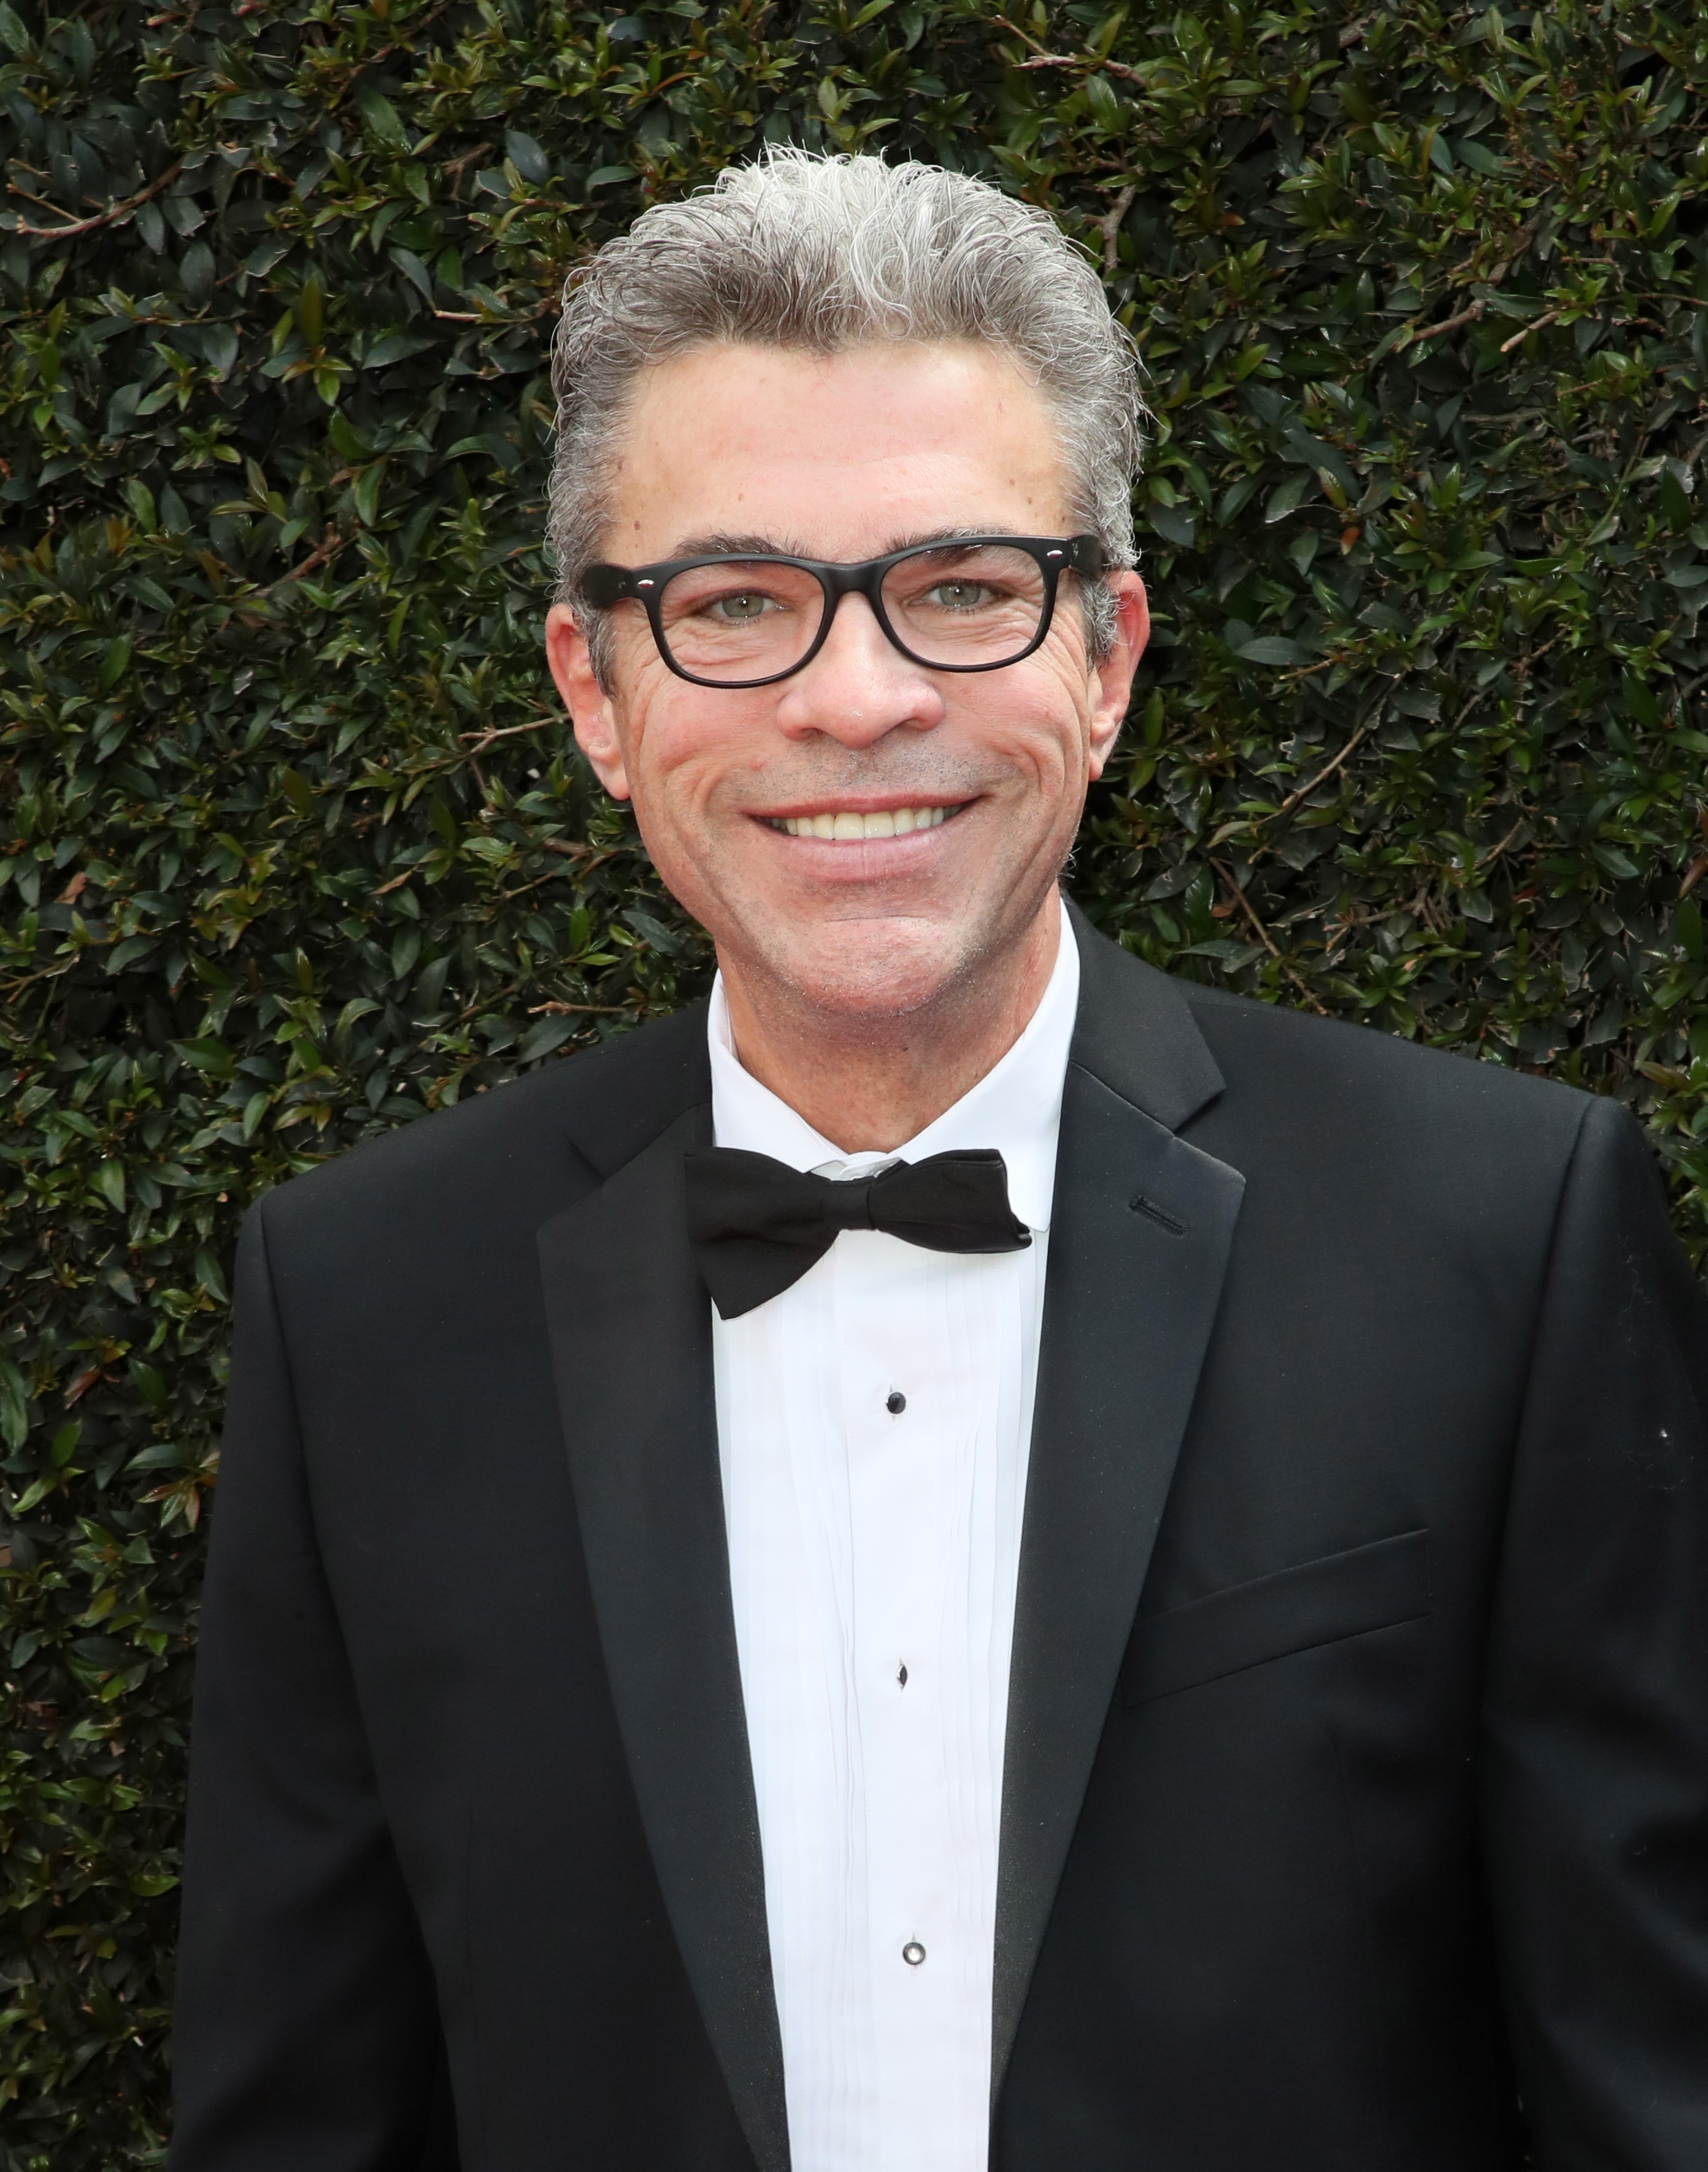 John J. York attends the 45th annual Daytime Emmy Awards in Pasadena, California on April 29, 2018 | Source: Getty Images